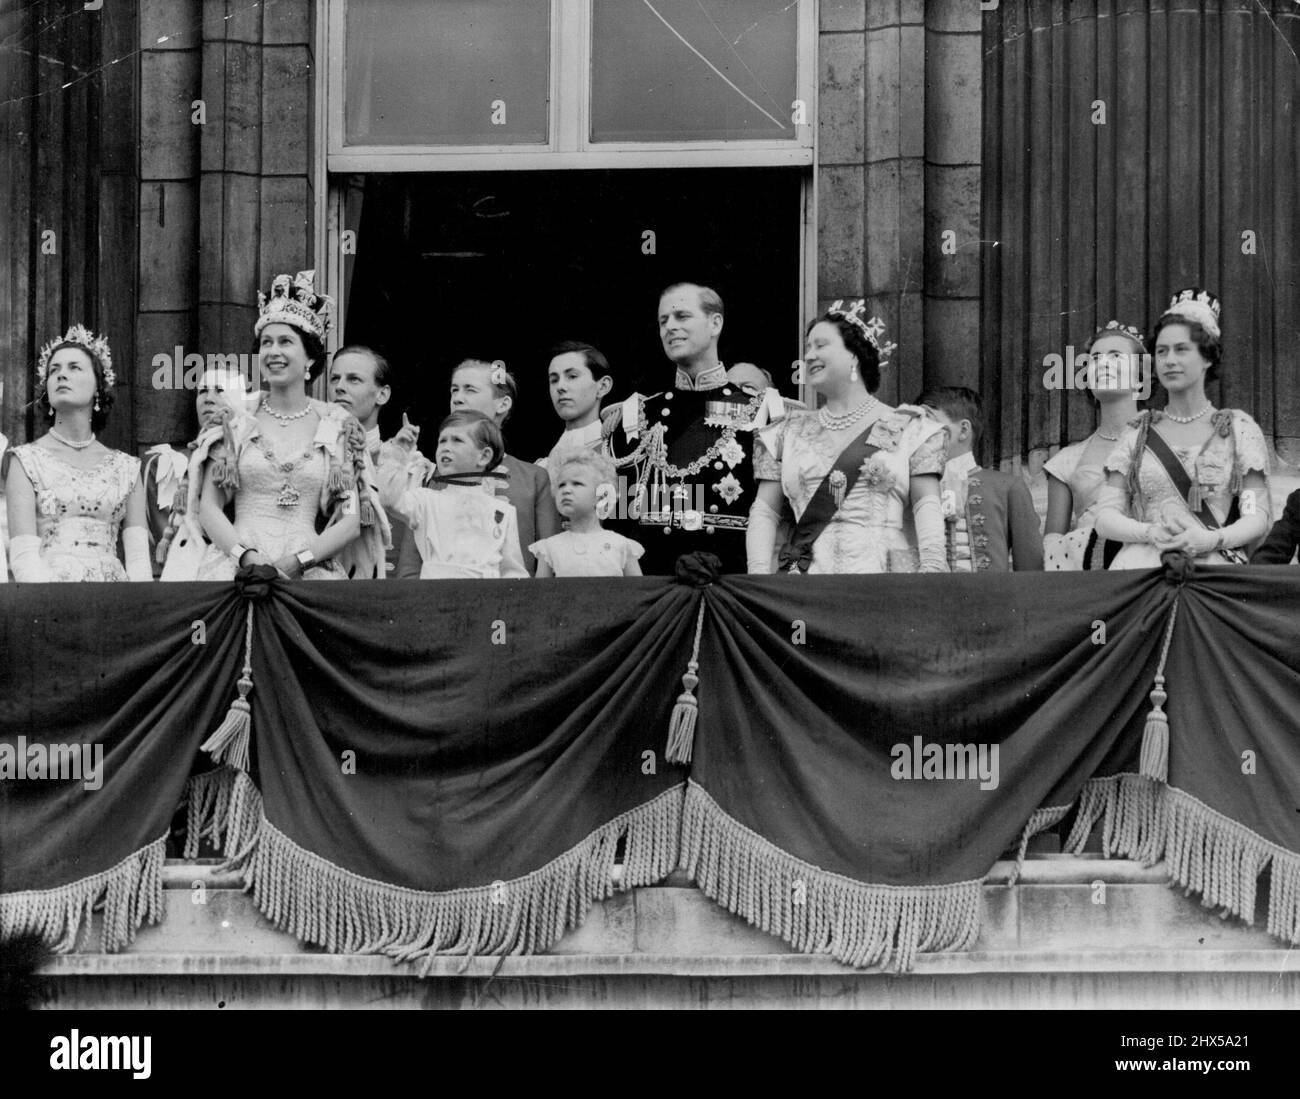 Queen Takes R.A.F. Salute - With a Pointer From Princes Charles -- Beside the smiling Queen wearing the Imperial State Crown Prince Charles points skyward from the balcony of Buckingham Palace 168 jet fighters fly over in the *****air force salute to her *****. January 01, 1953. Stock Photo